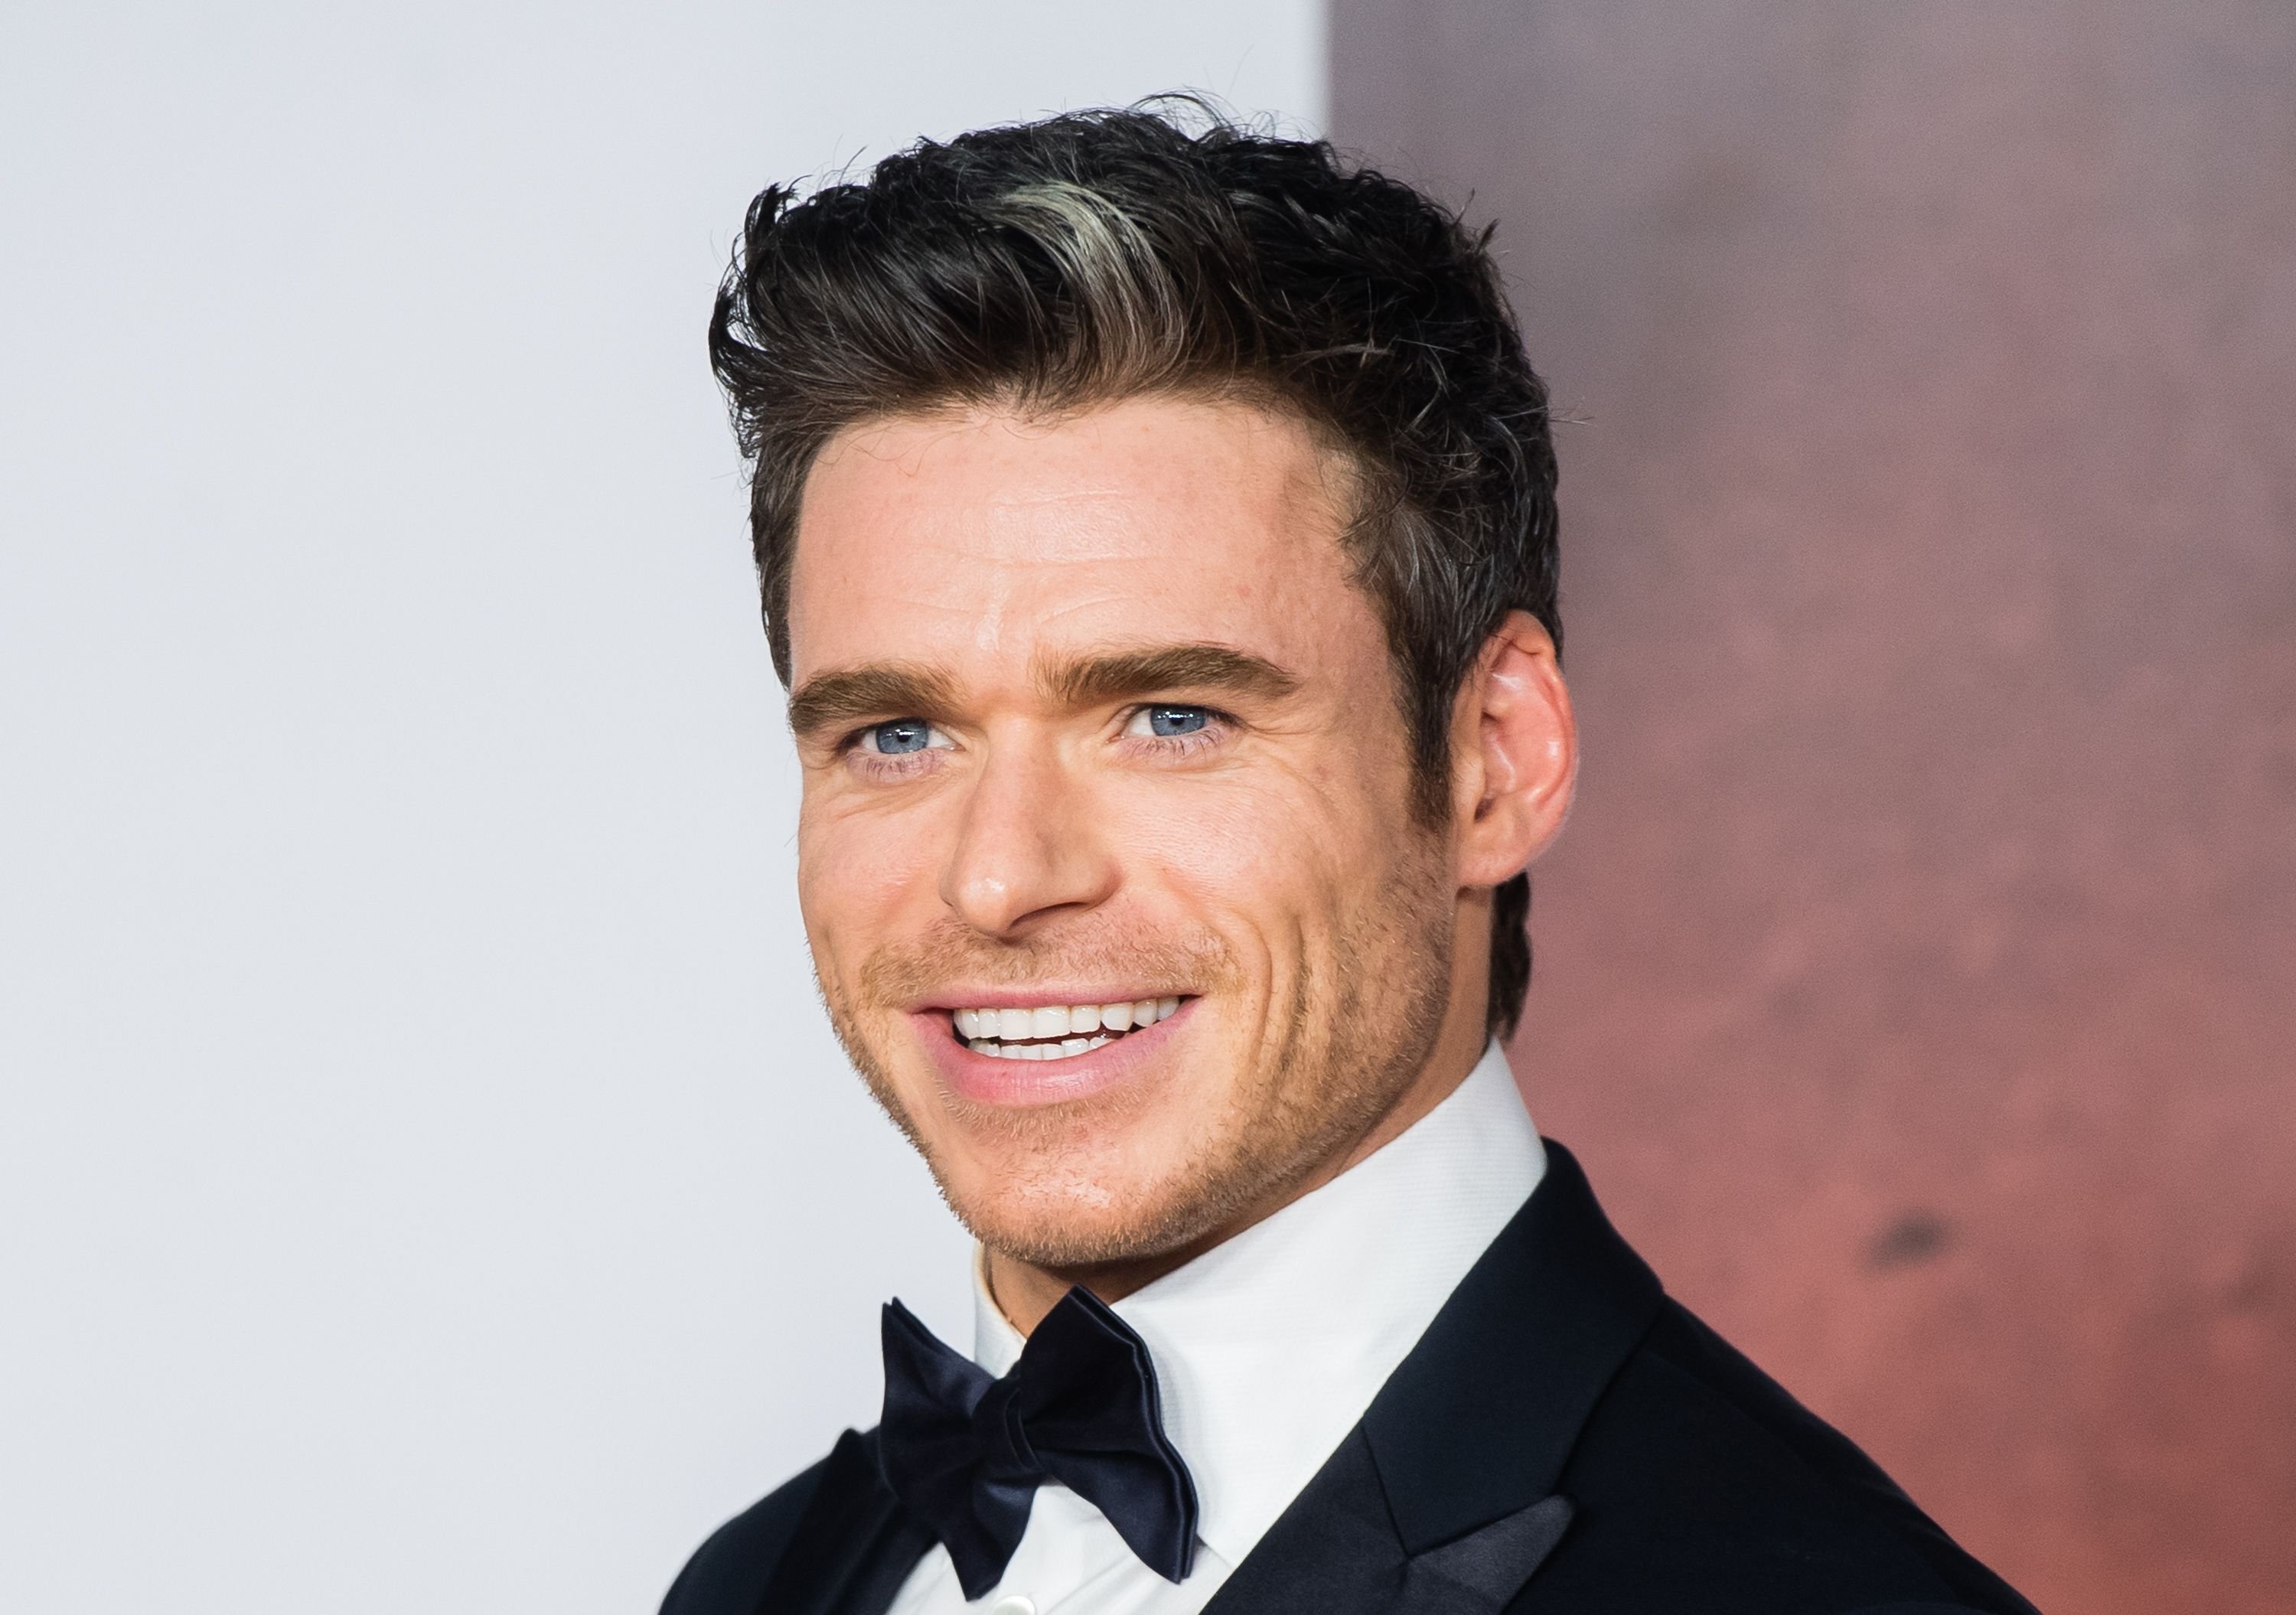 Richard Madden at the premiere "1917" in 2019 in London | Source: Getty Images